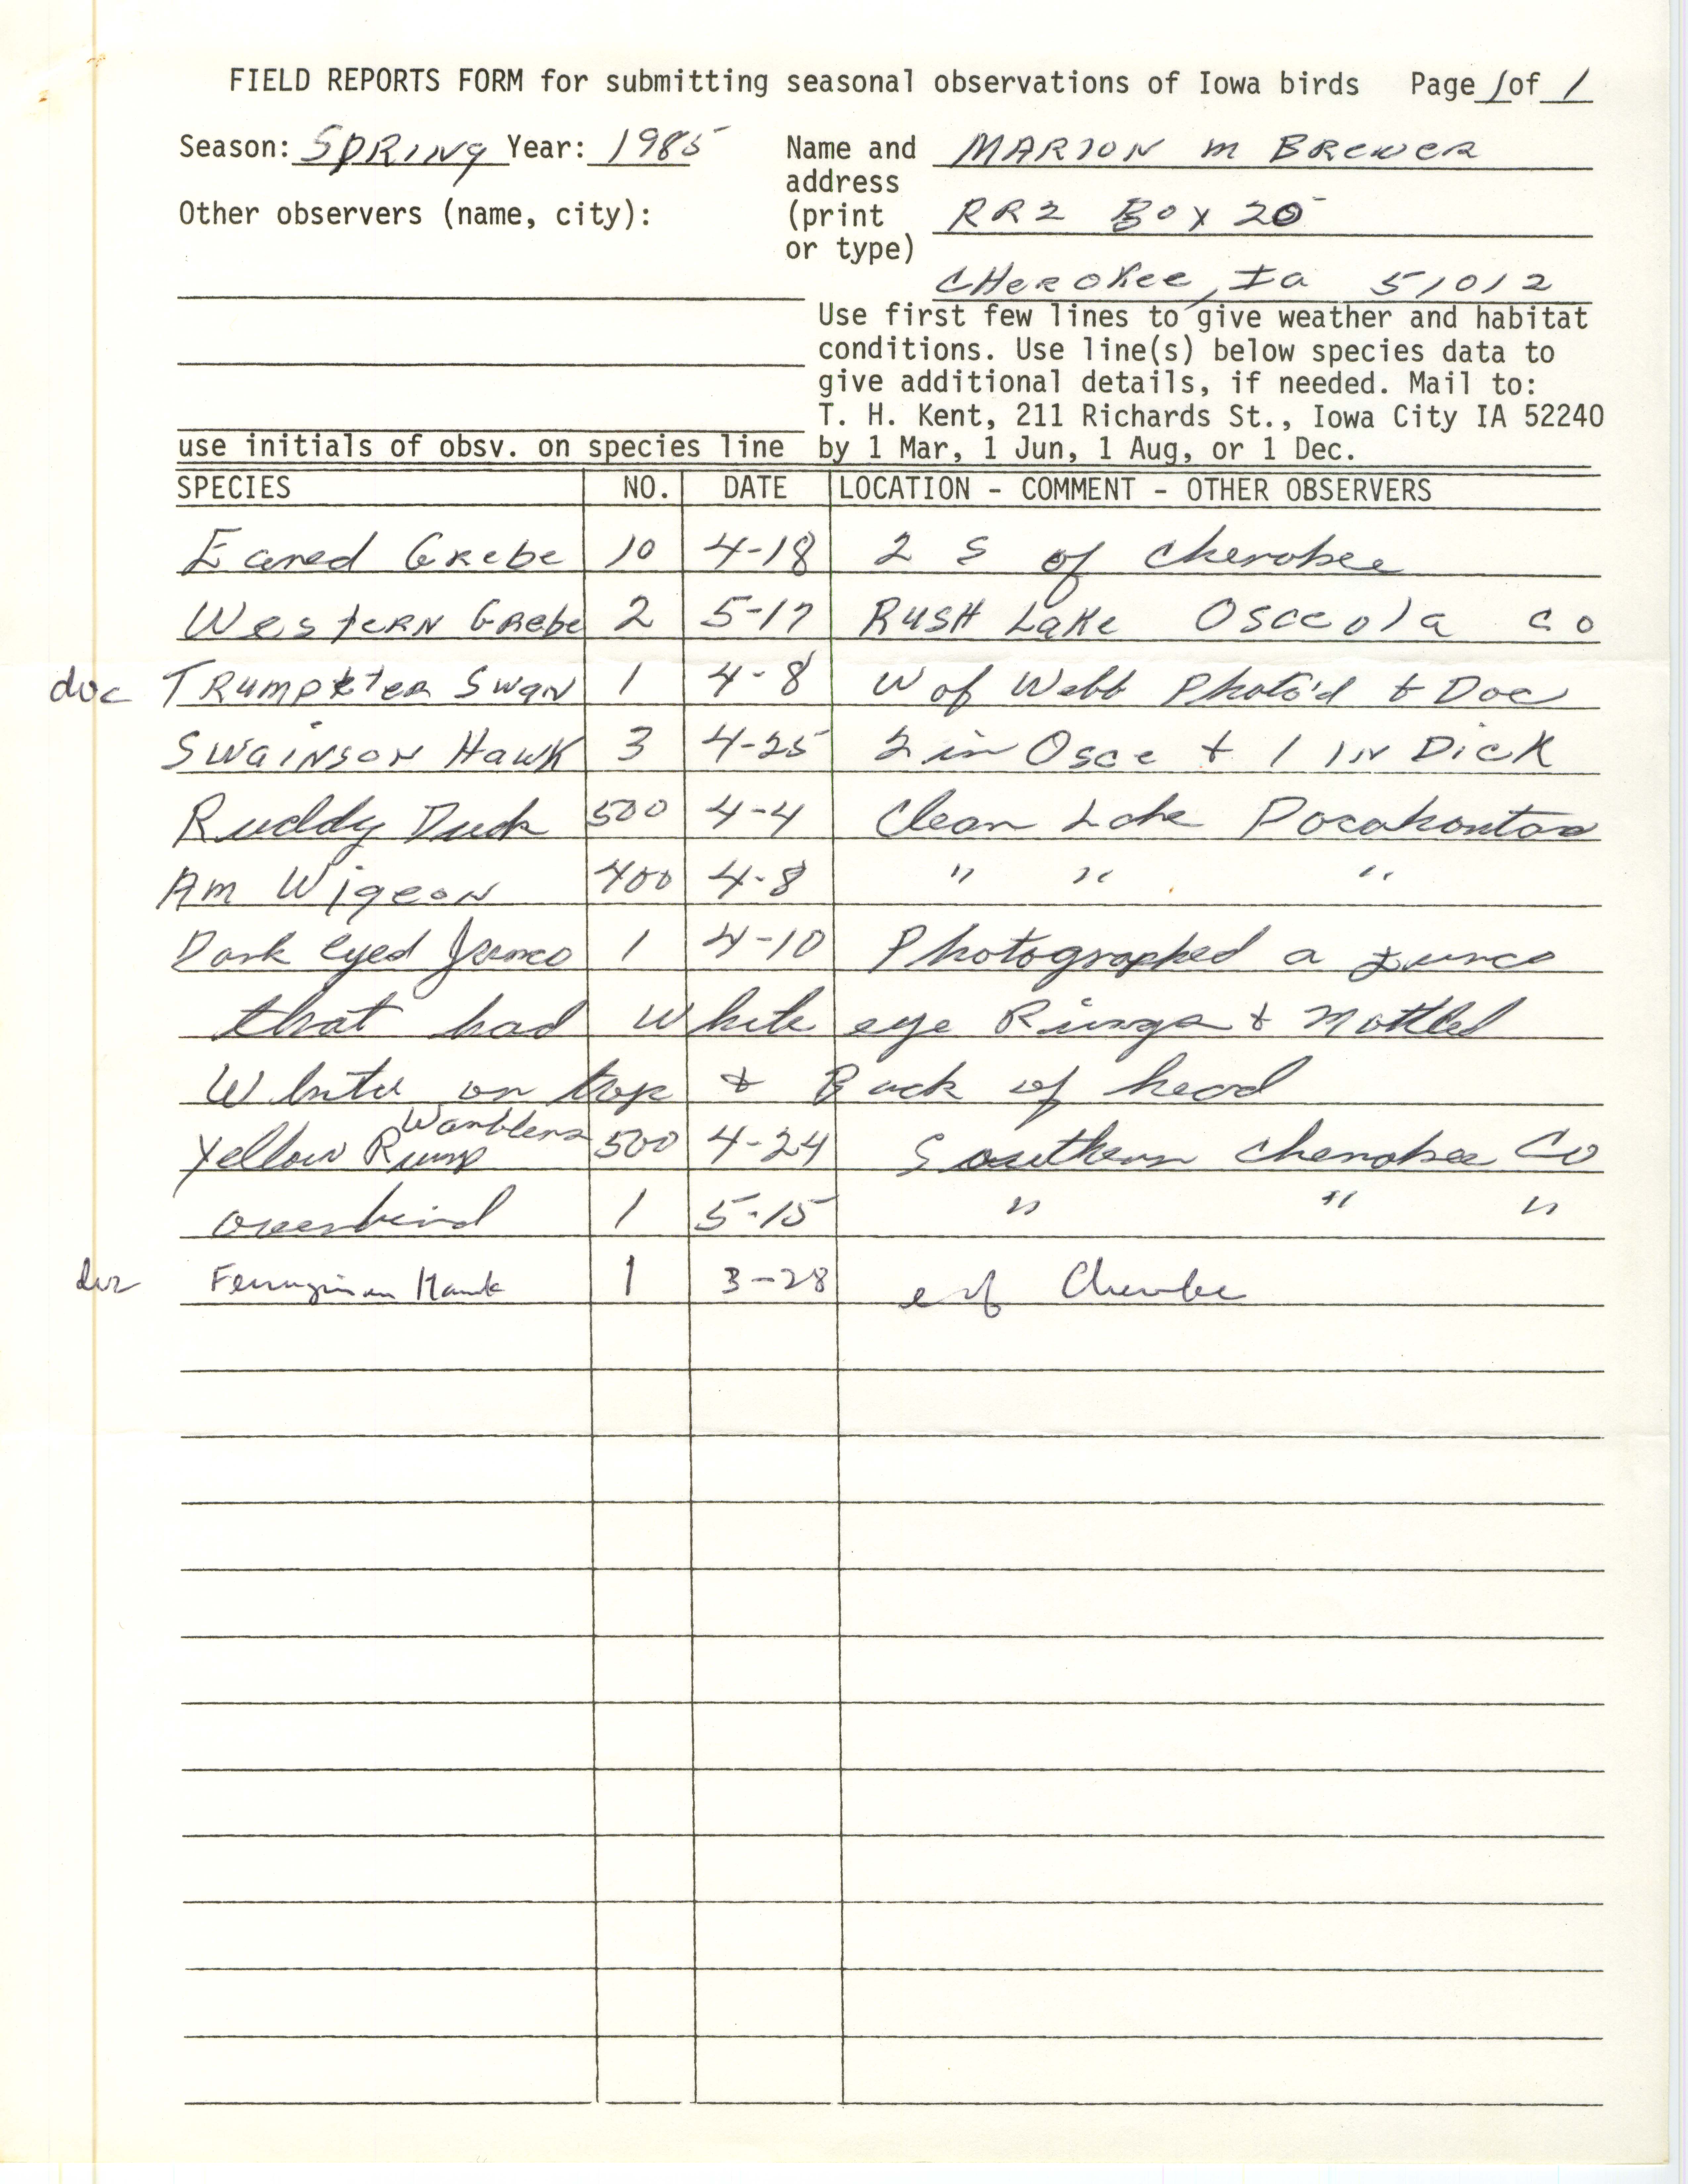 Field reports form, contributed by Marion M. Brewer, spring 1985